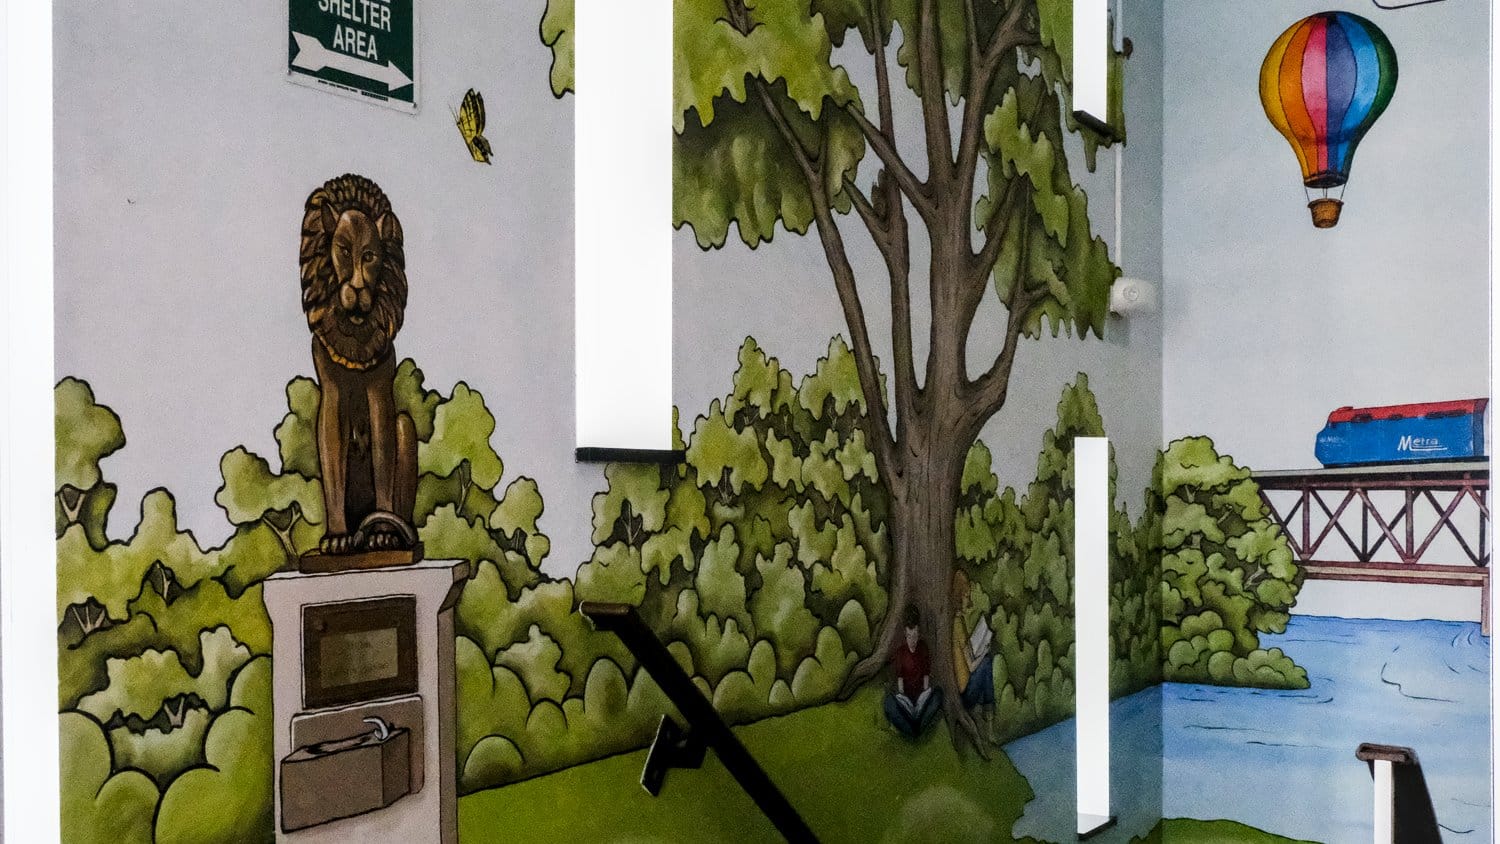 Summer stairwell mural featuring the Lion's Park lion statue and the Metra.